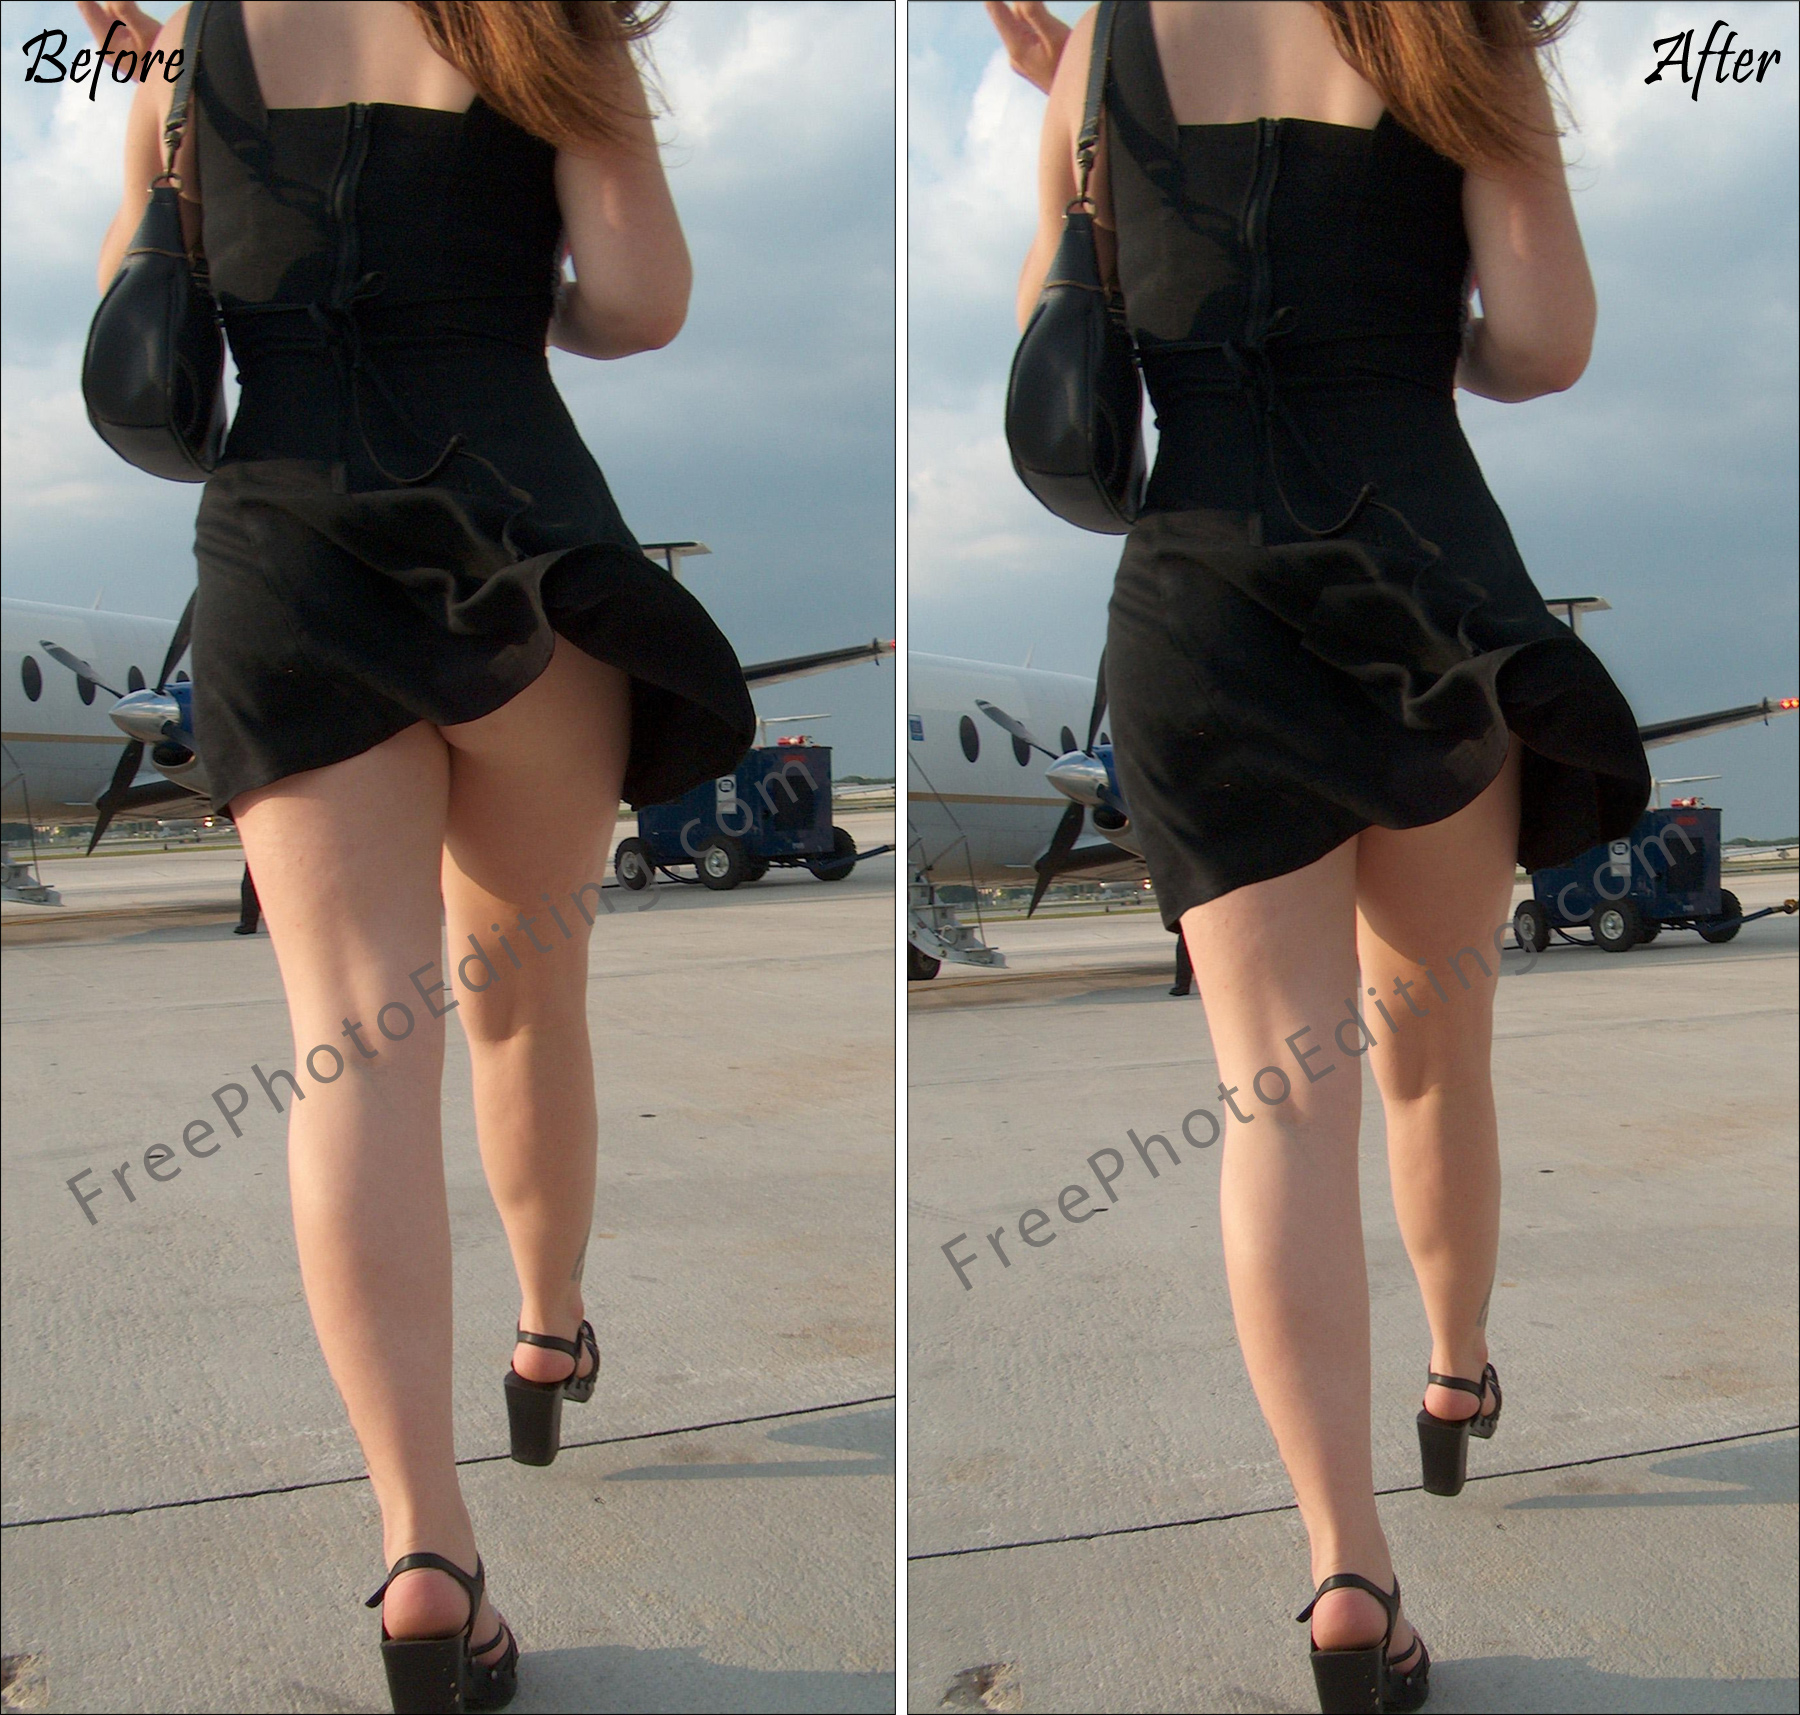 Touch up a photo that offends your sensibilties due to excessive and indecent exposure. View before and after samples.